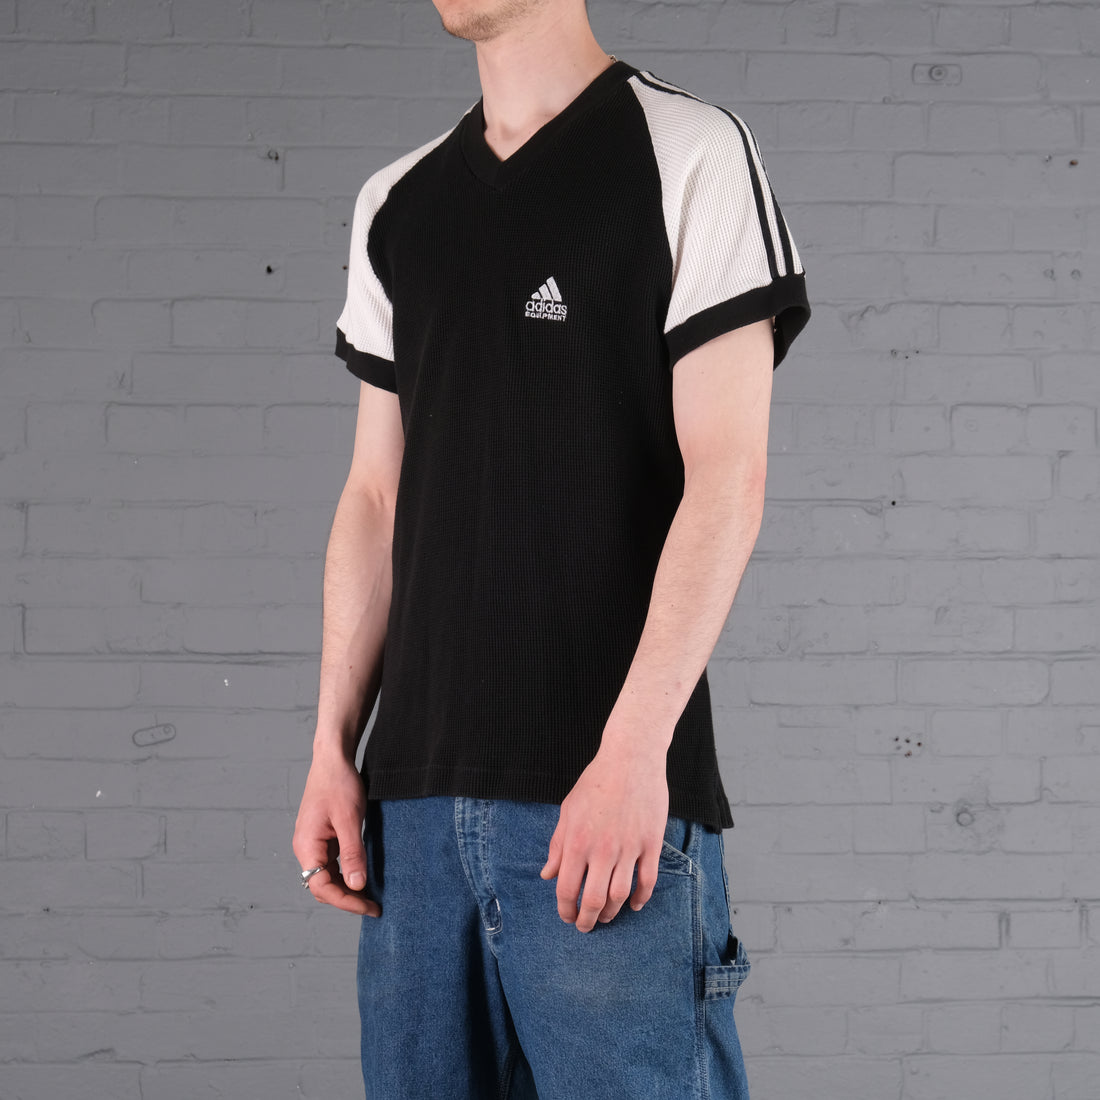 Vintage Adidas knitted style top in black